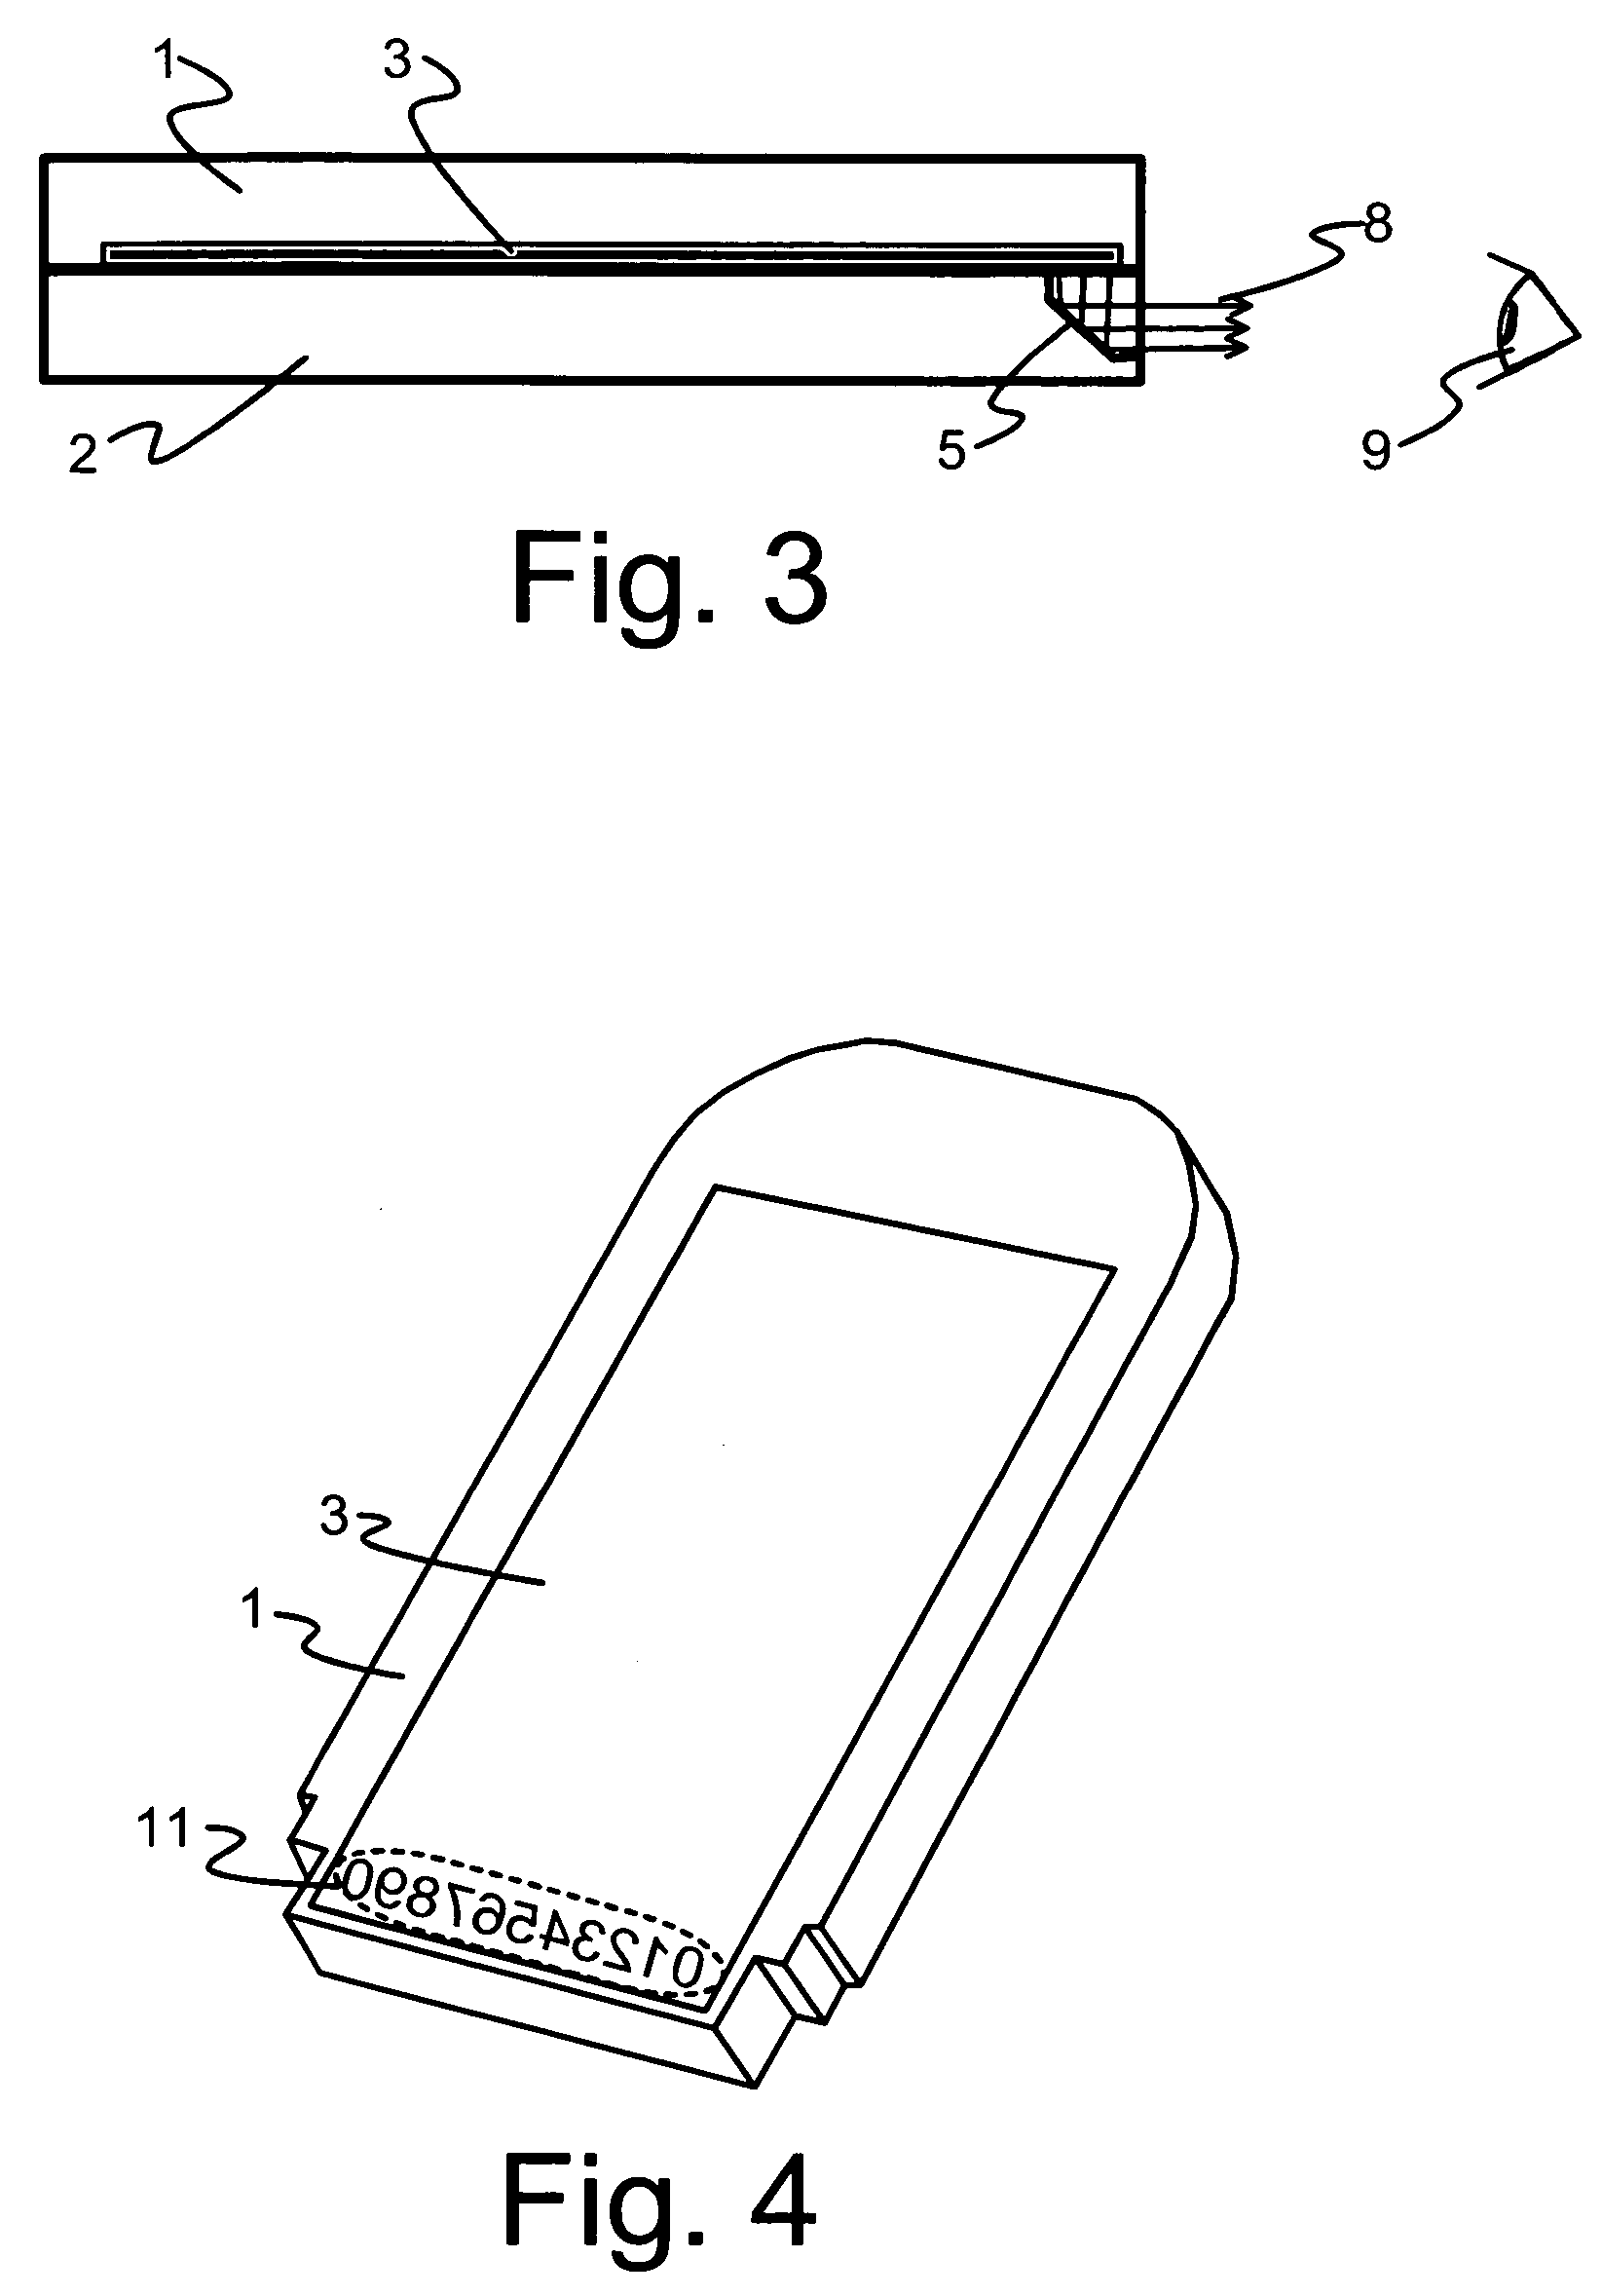 Sub-display of a mobile device